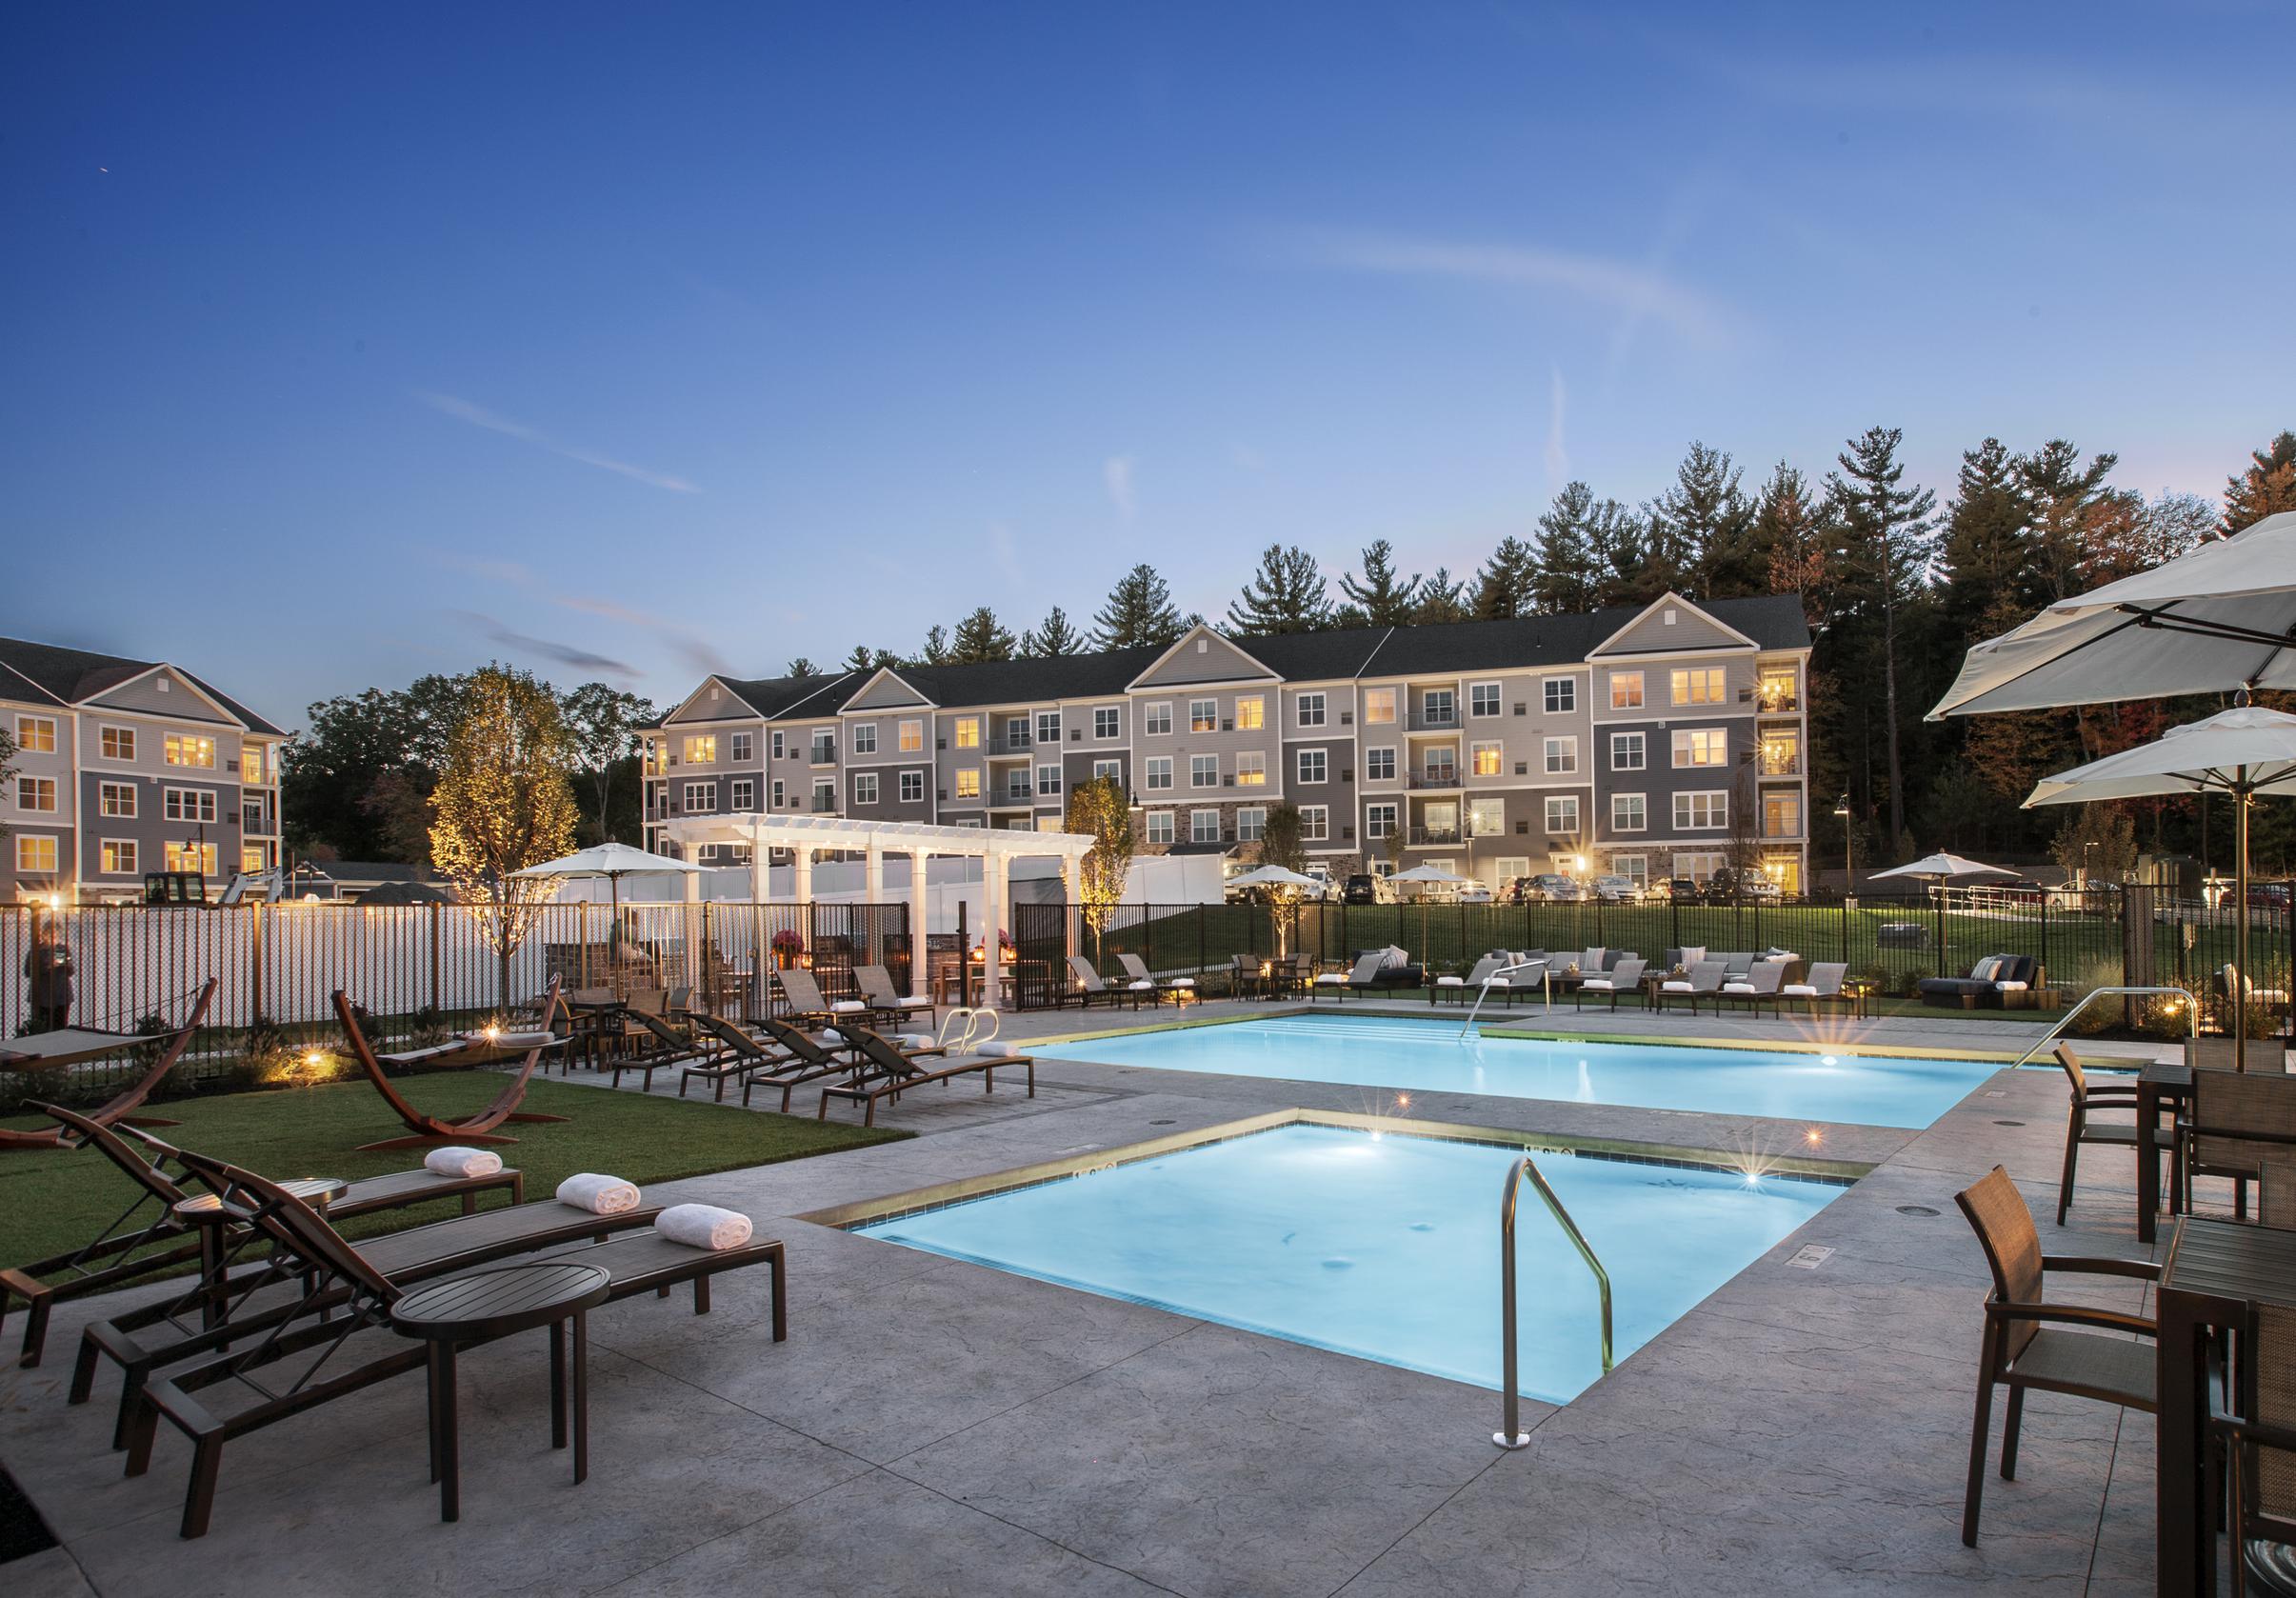 Pool and outdoor lounge area at Parc Westborough